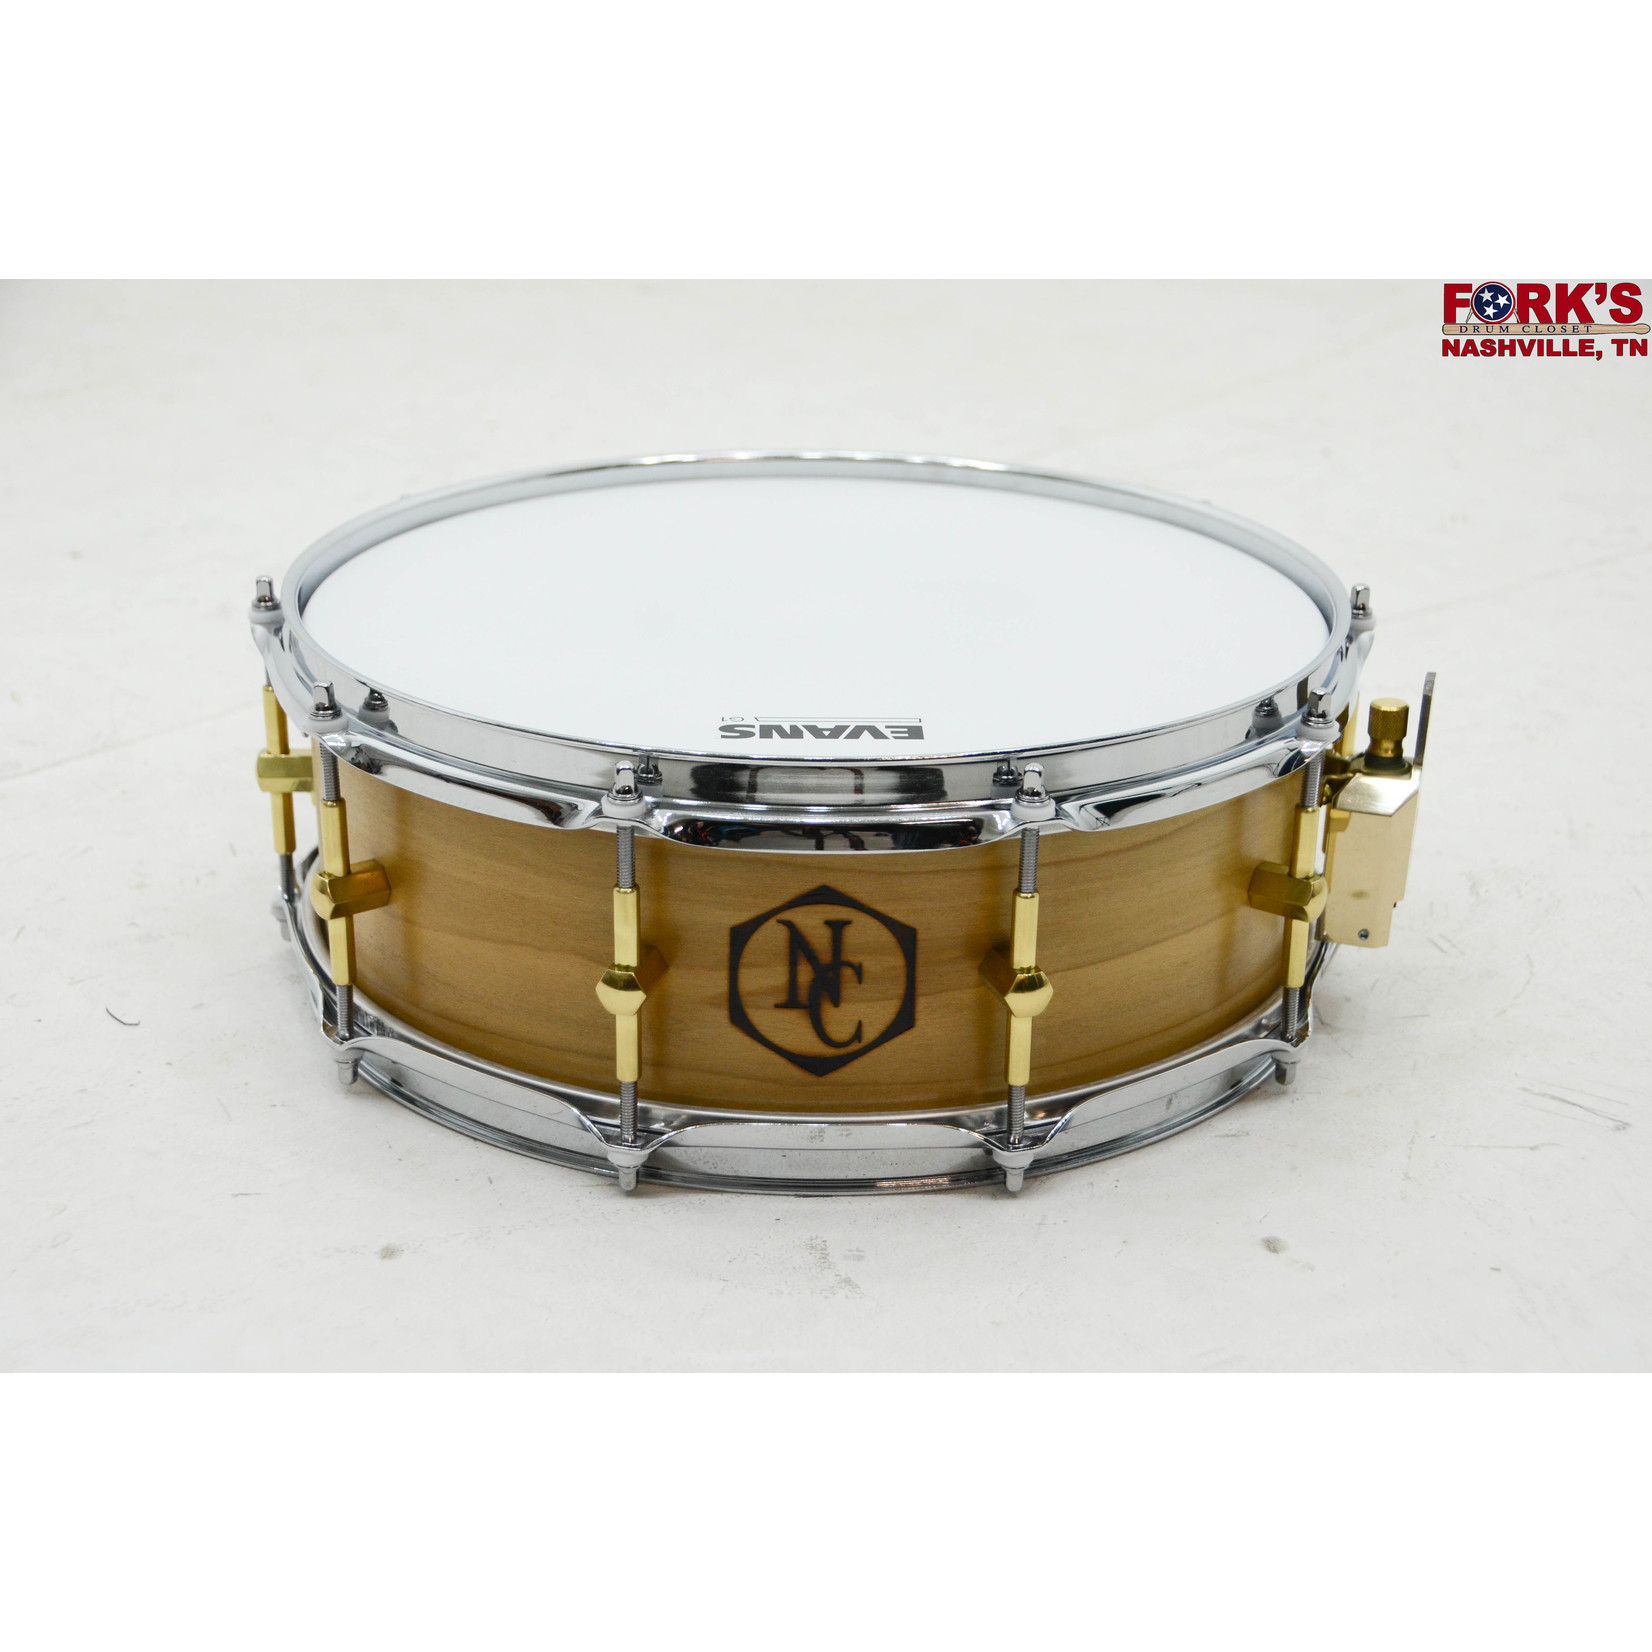 Noble and Cooley Noble & Cooley 5x14 Solid Shell Classic Snare Drum - Tulip, "Natural Oil"